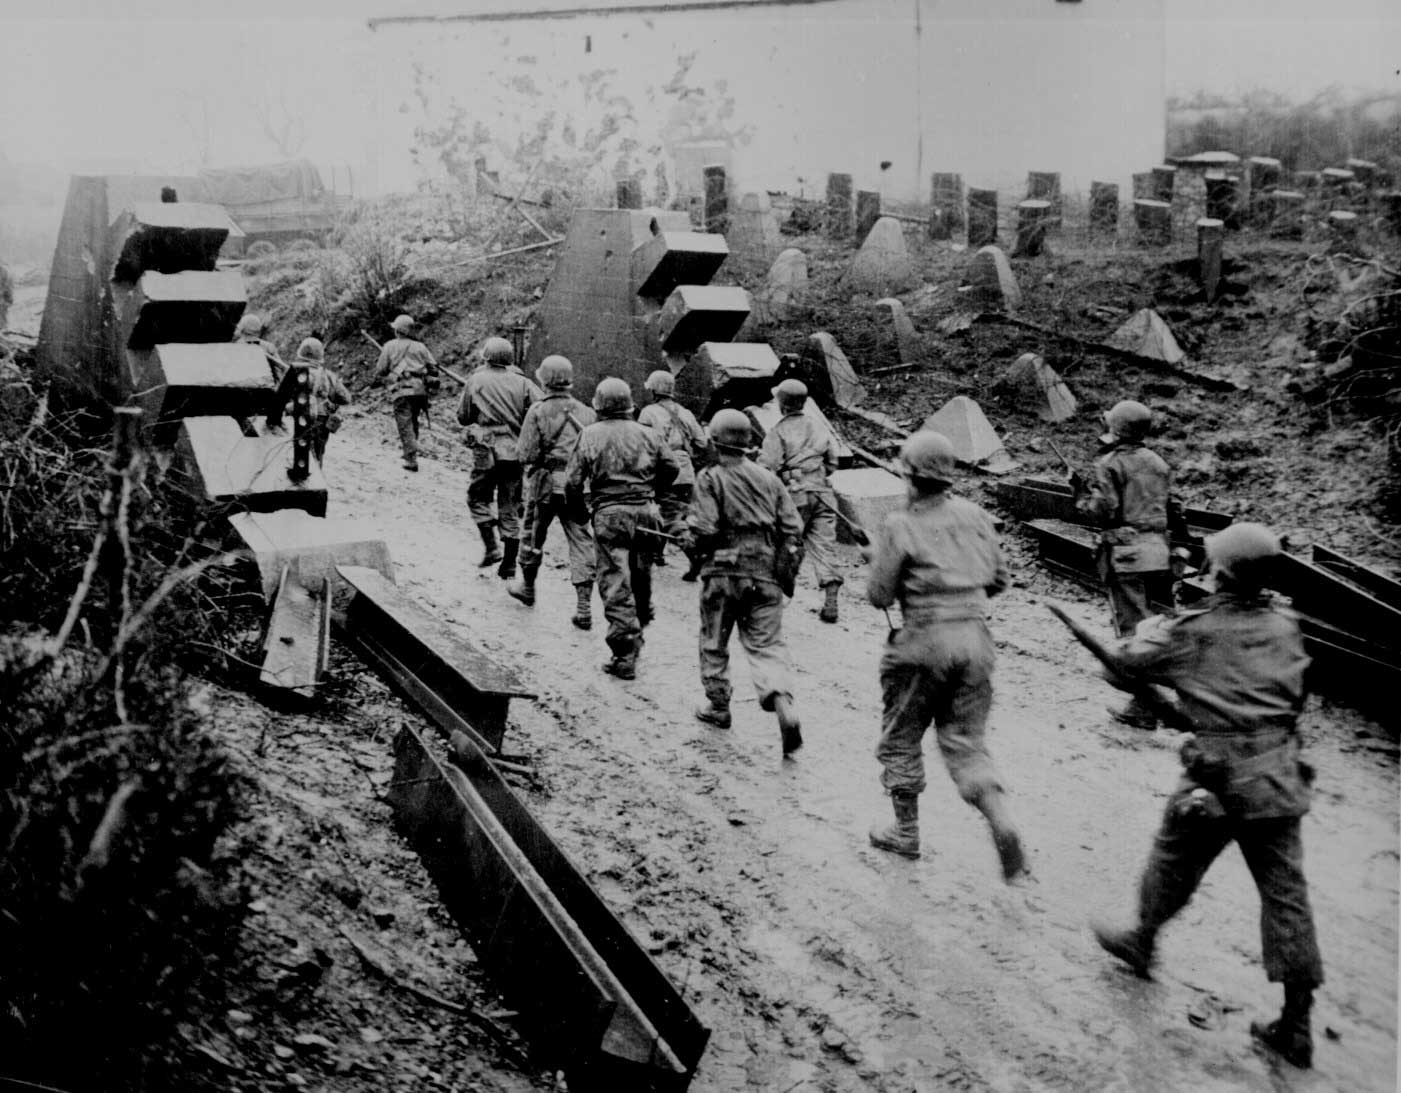 American troops crossing the Siegfried Line fortifications, early 1945